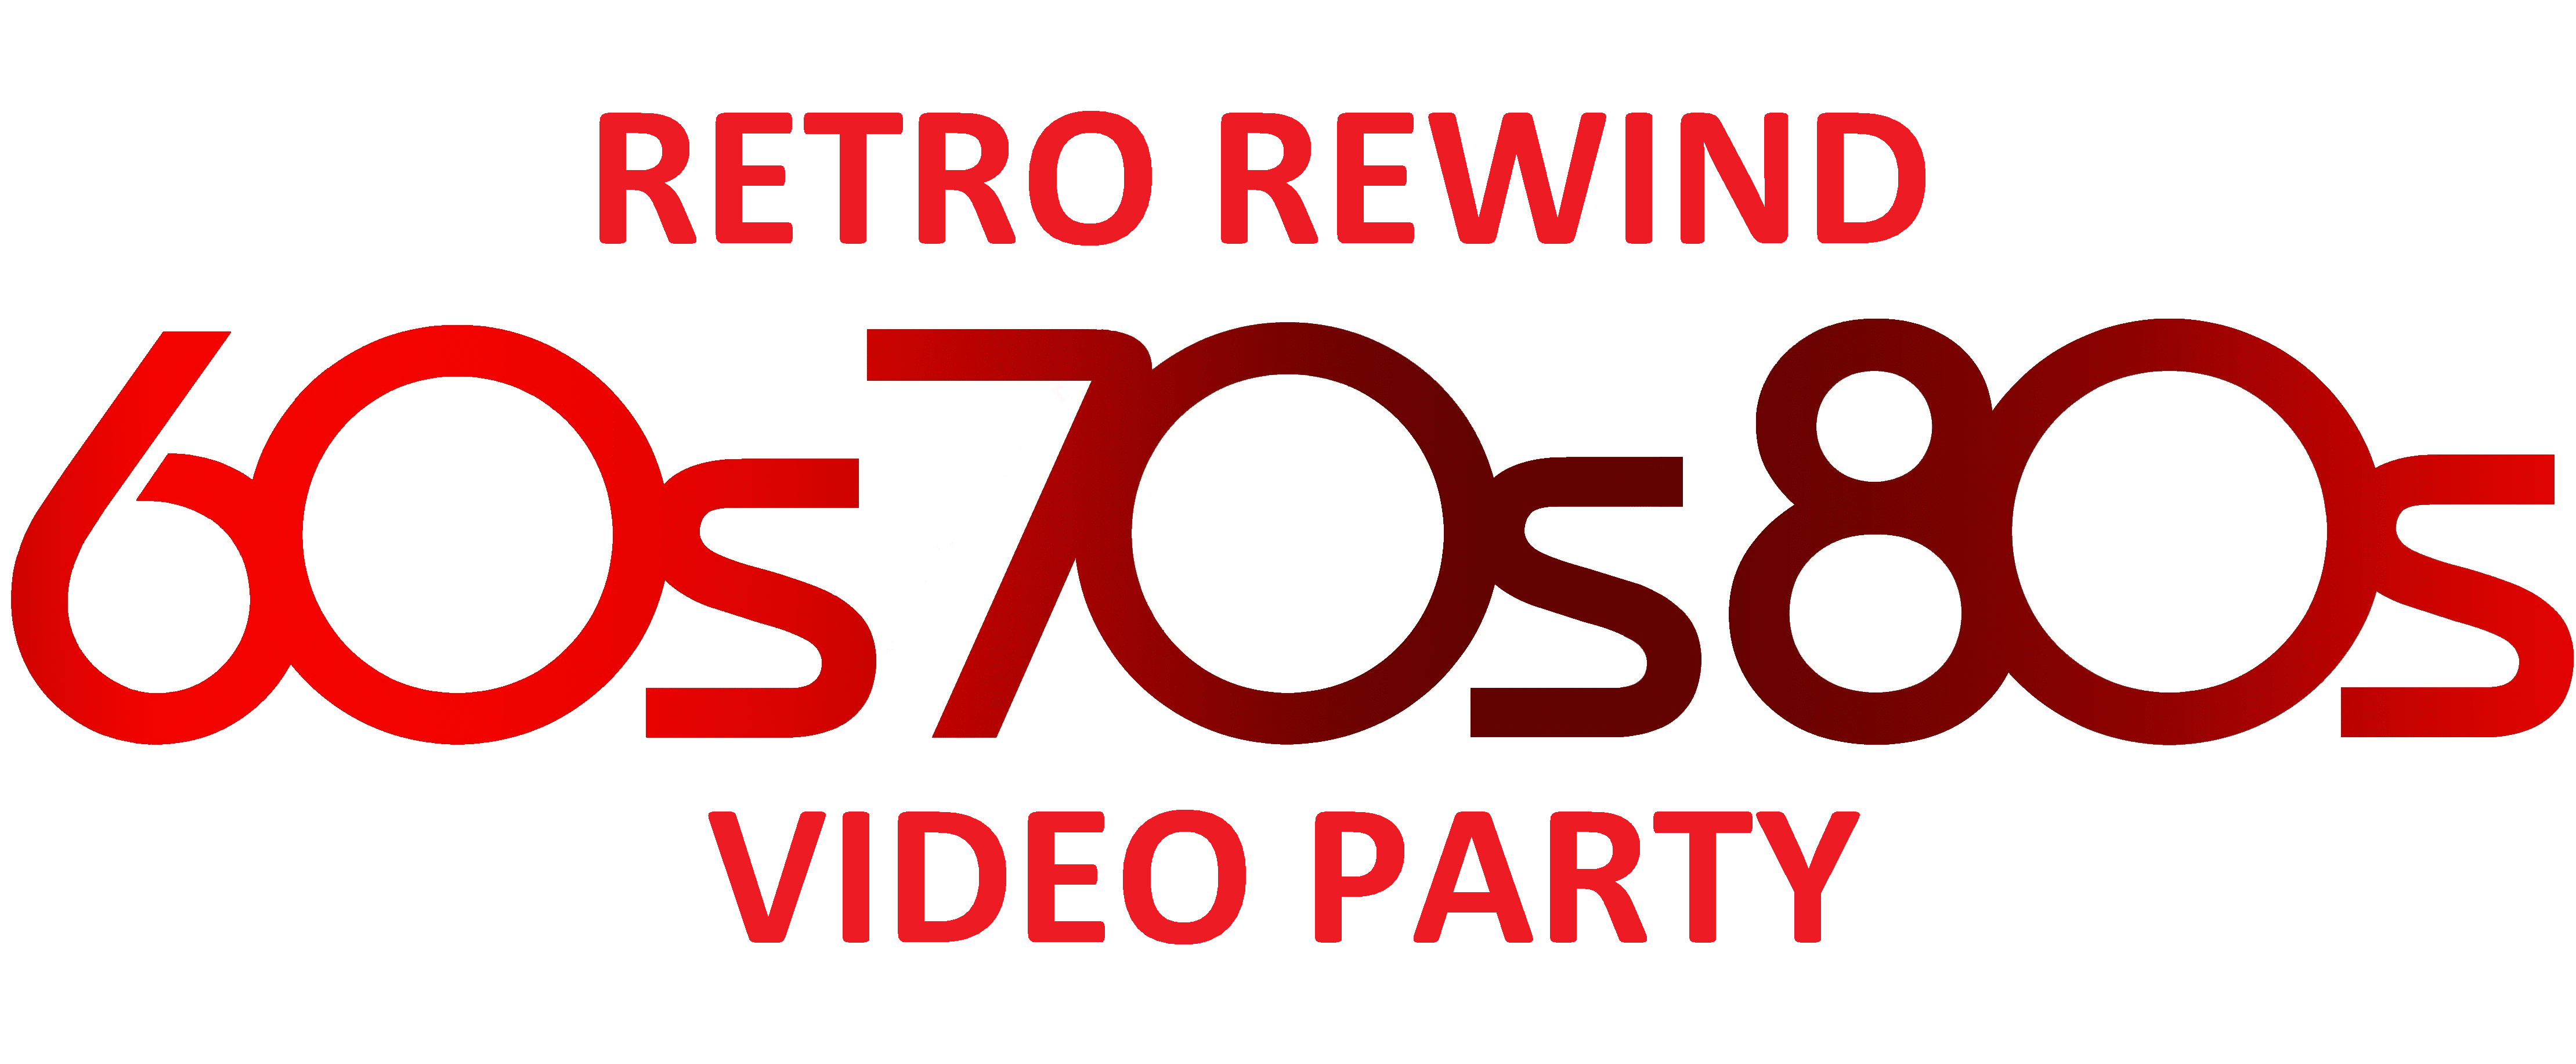 Retro Rewind, a 60s 70s and 80s video party at Studio 188